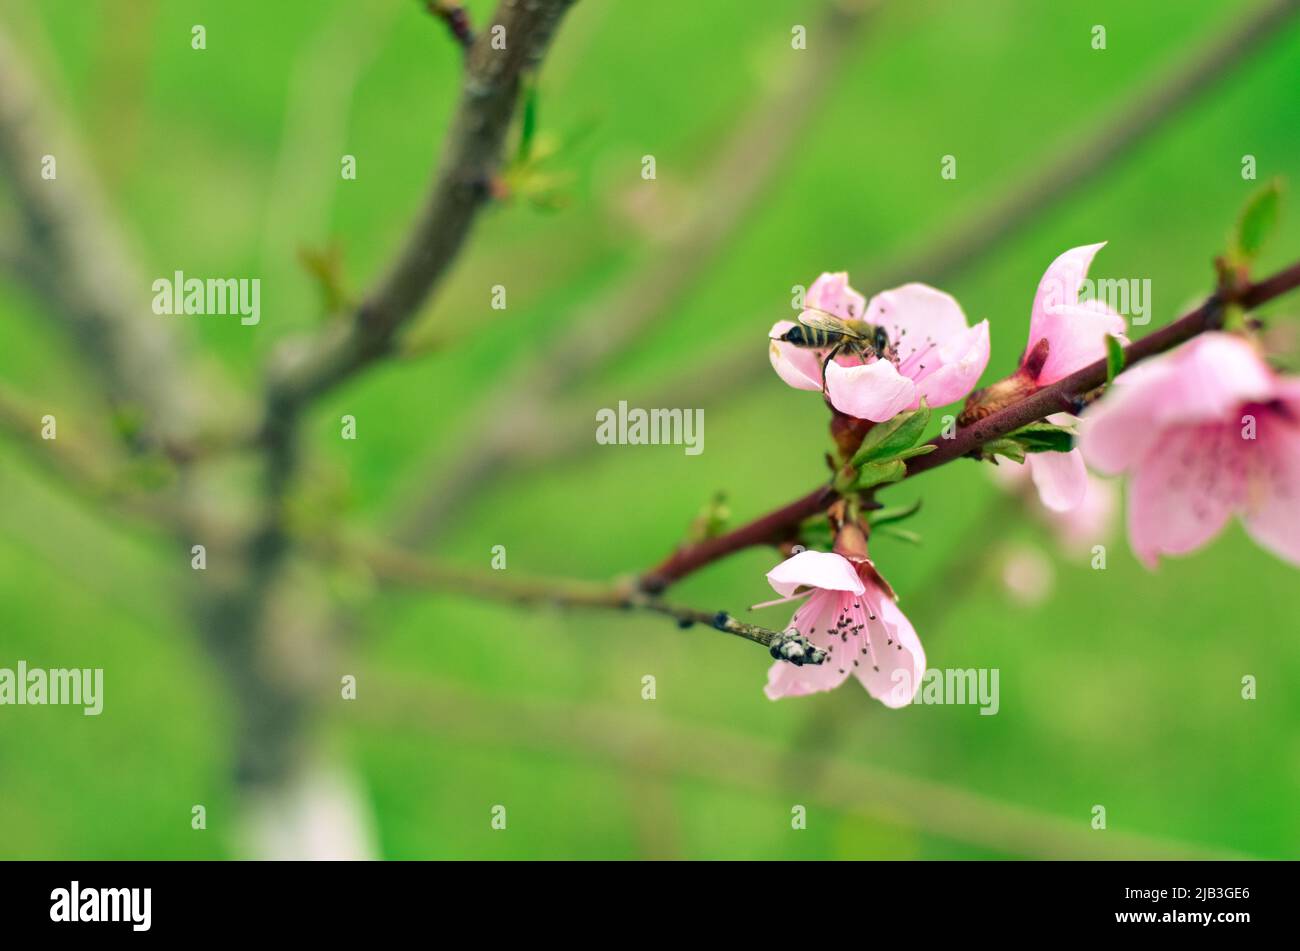 Peach blossom in the sunny day on green grass background Stock Photo